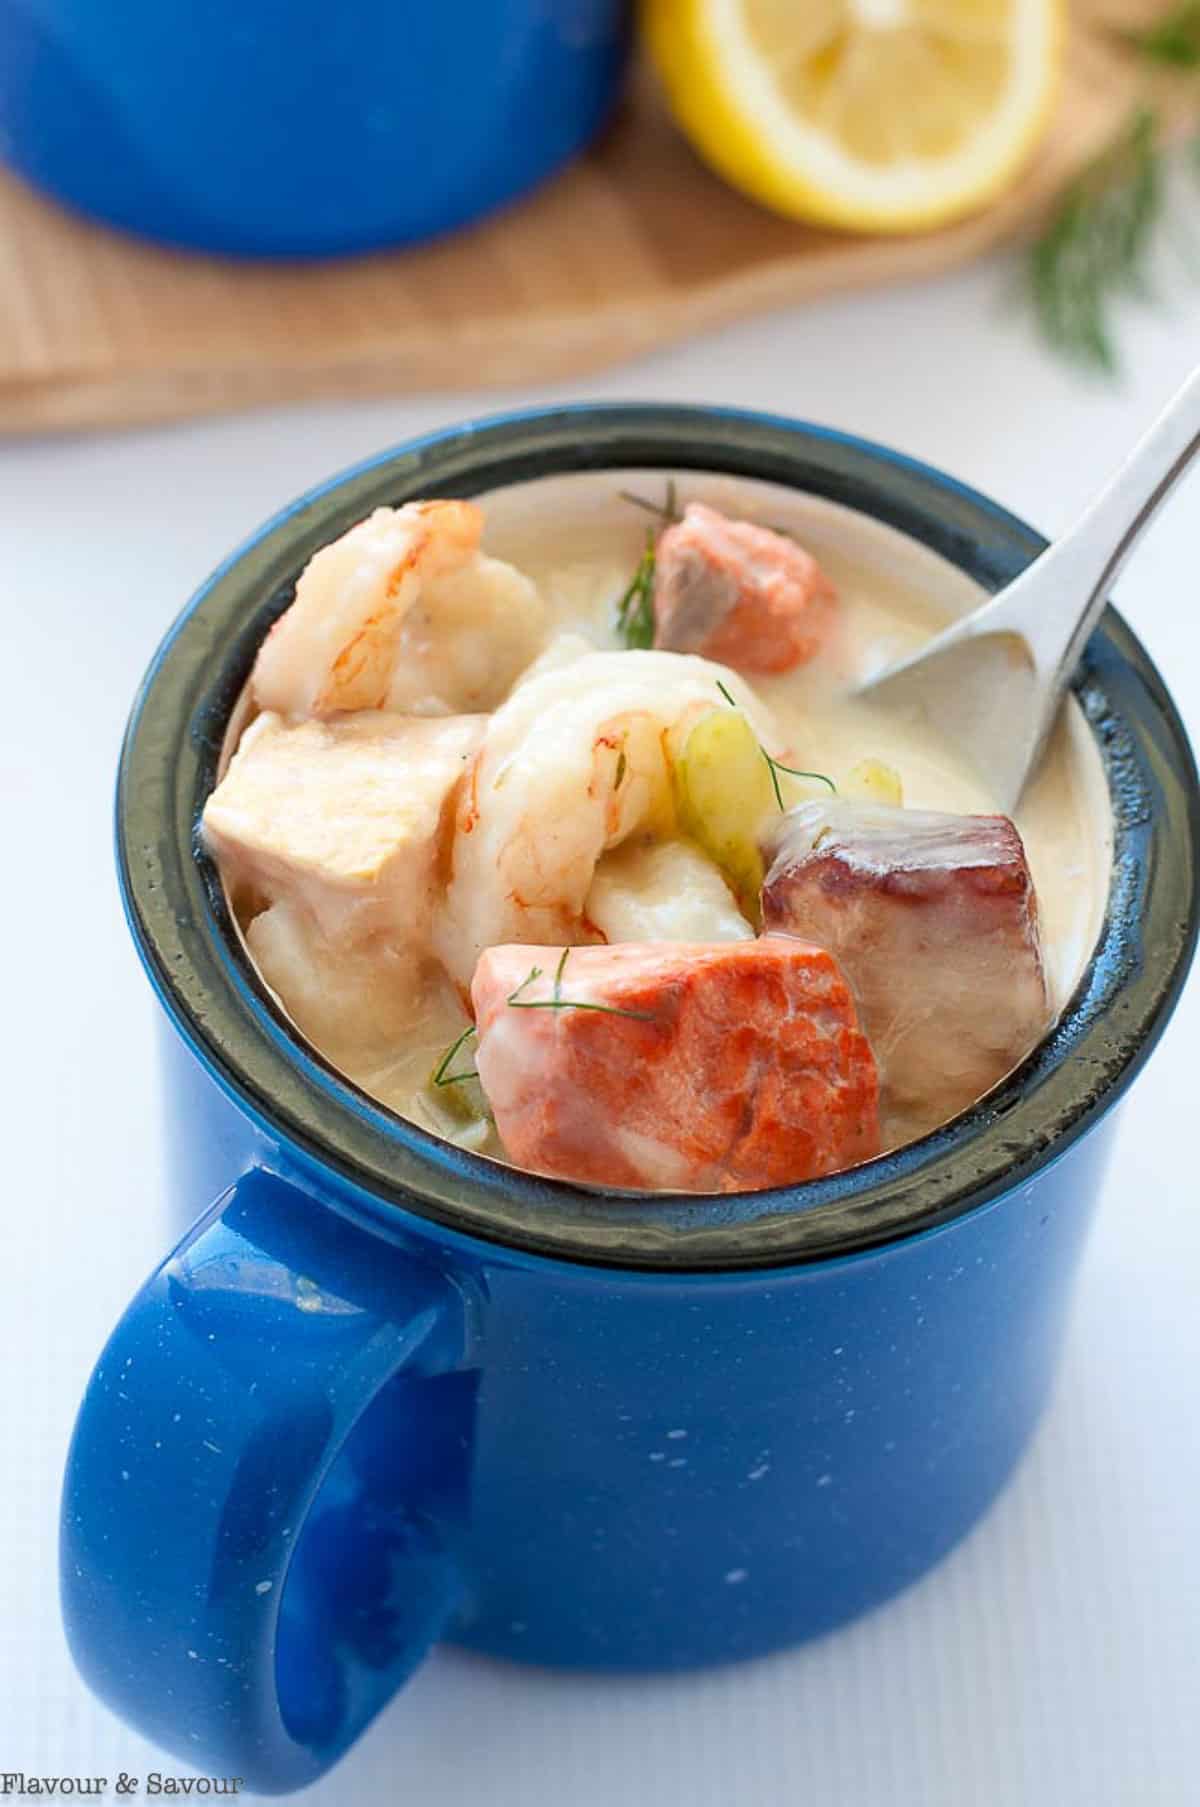 a blue mug filled with seafood chowder made with salmon, shrimp, halibut and more